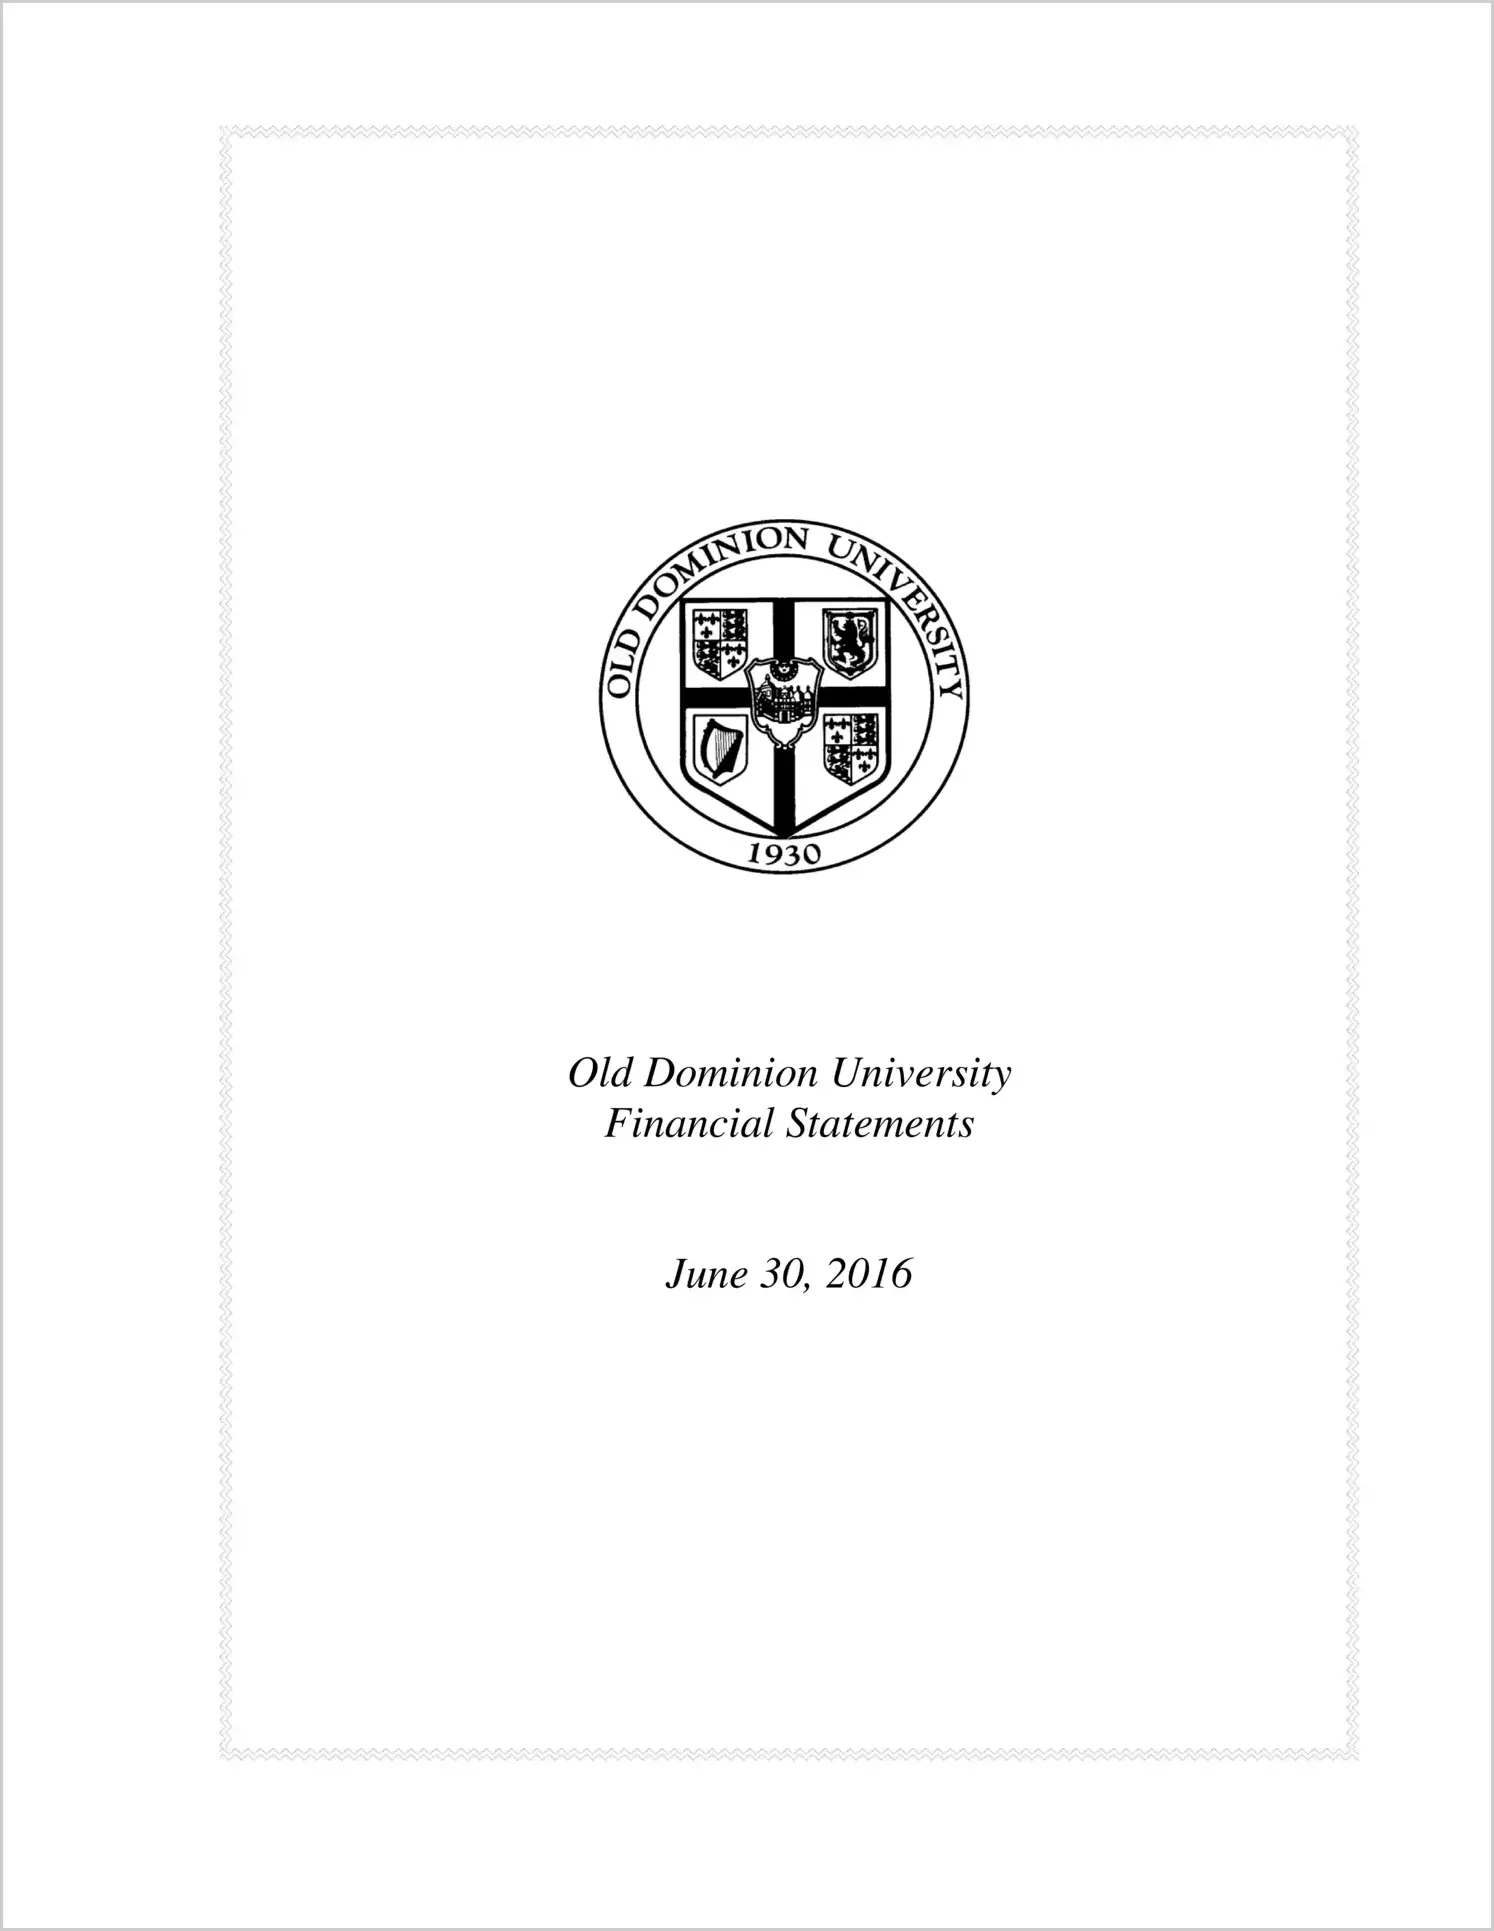 Old Dominion University Financial Statements for the year ended June 30, 2016